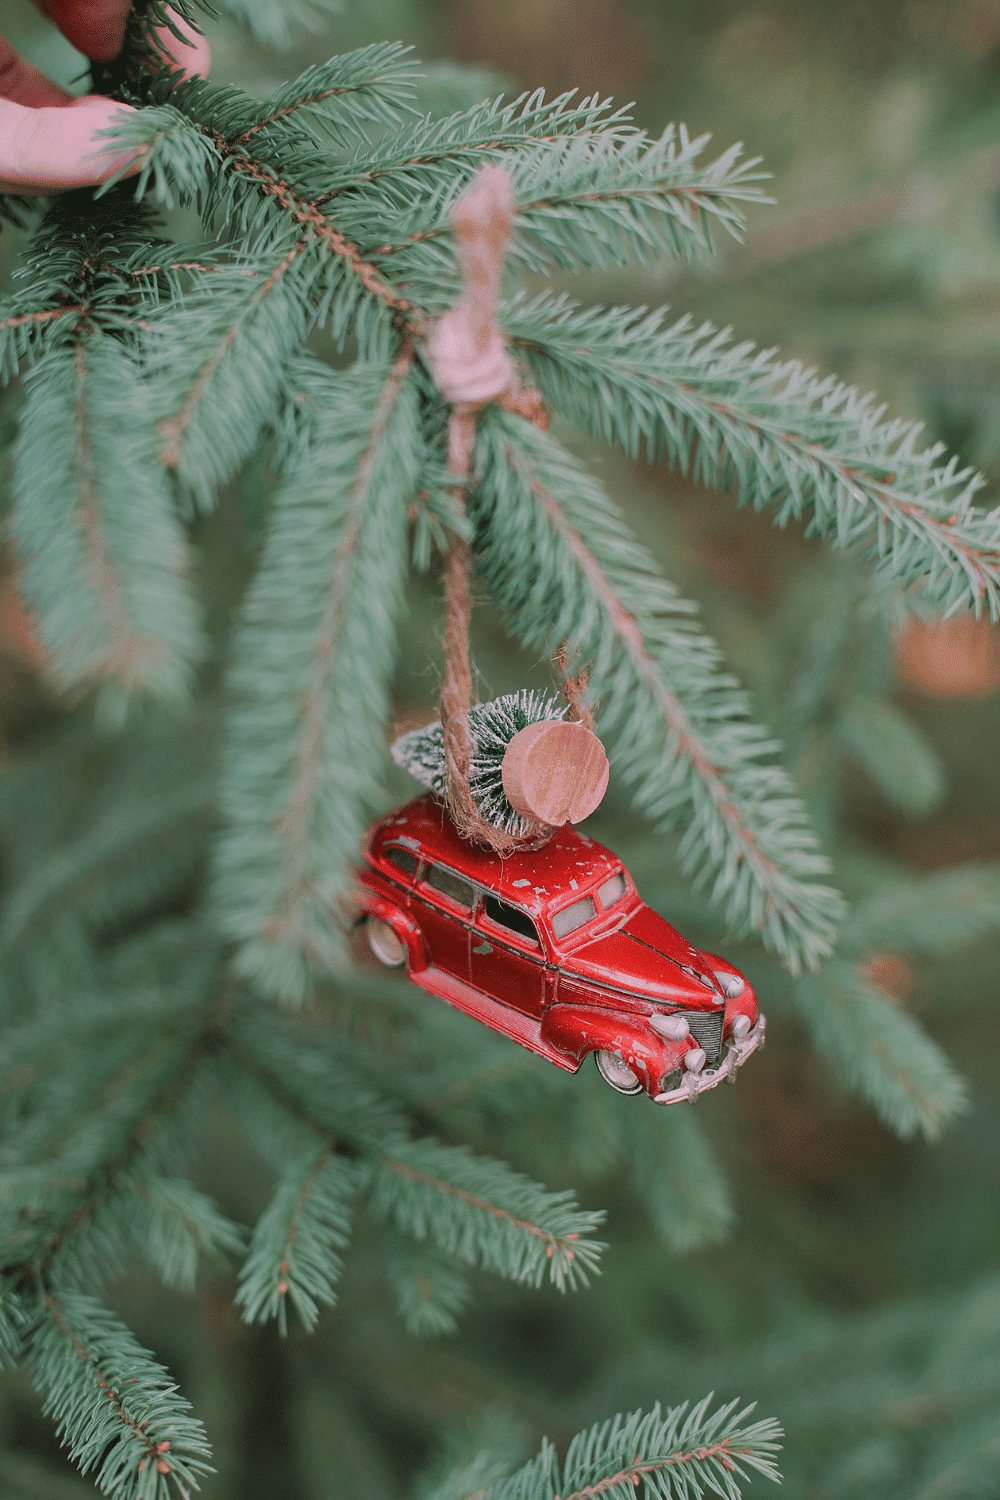 How to Make a DIY Ornament with Old Matchbox Car and Bottle Brush Tree